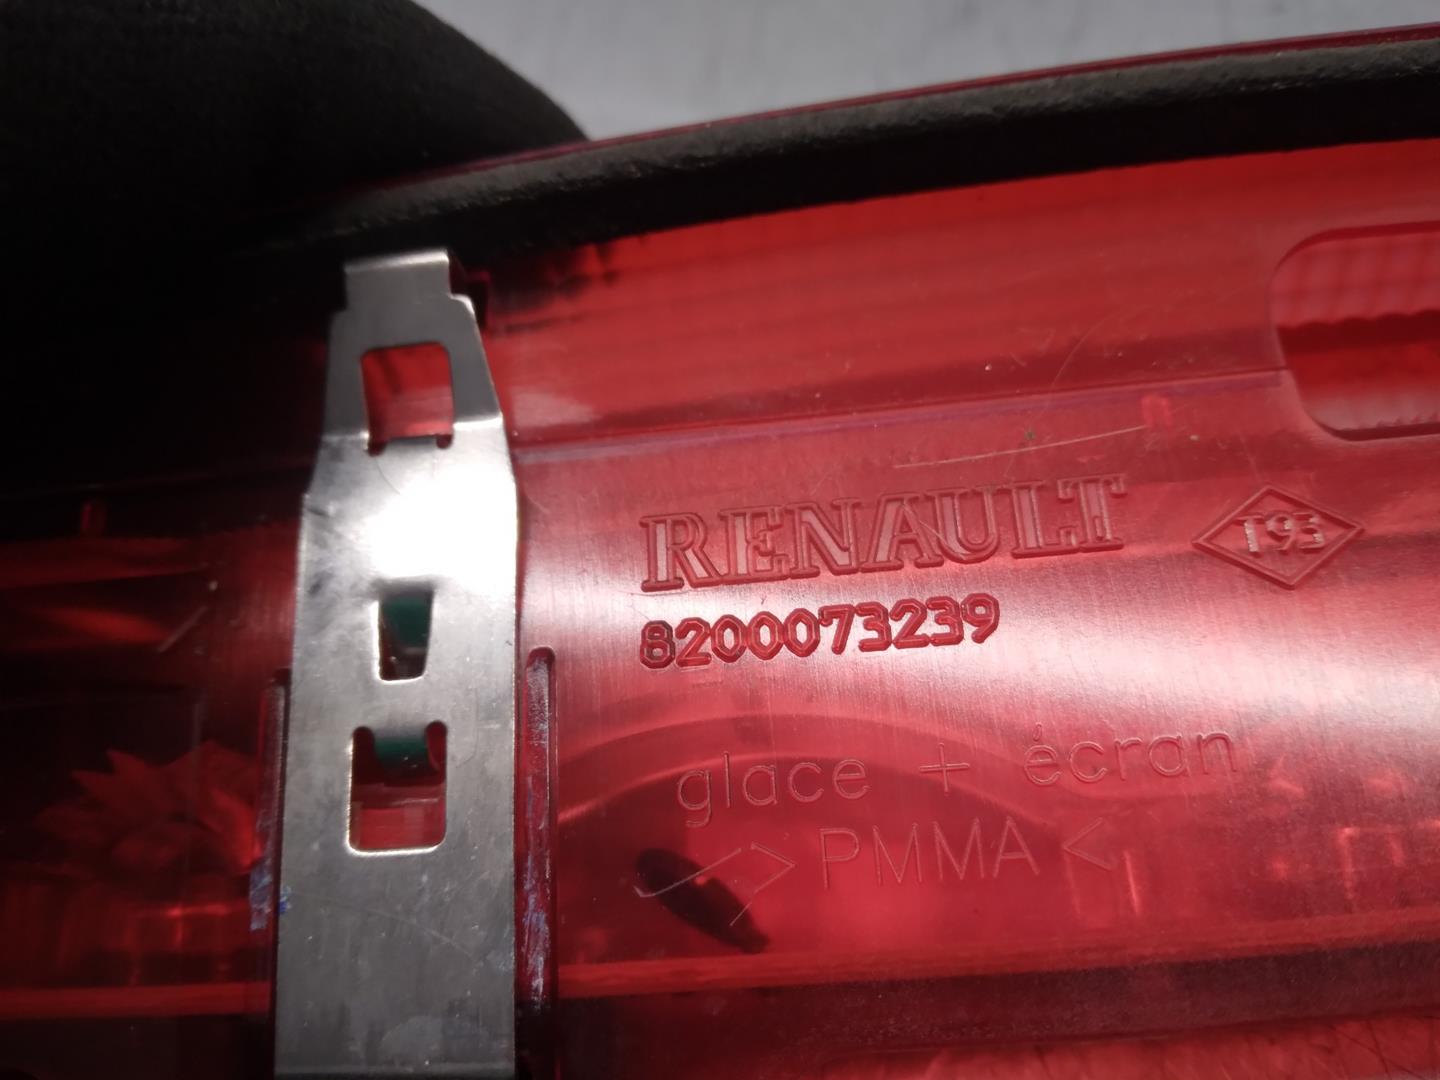 RENAULT Scenic 2 generation (2003-2010) Rear cover light 8200073239 21108289